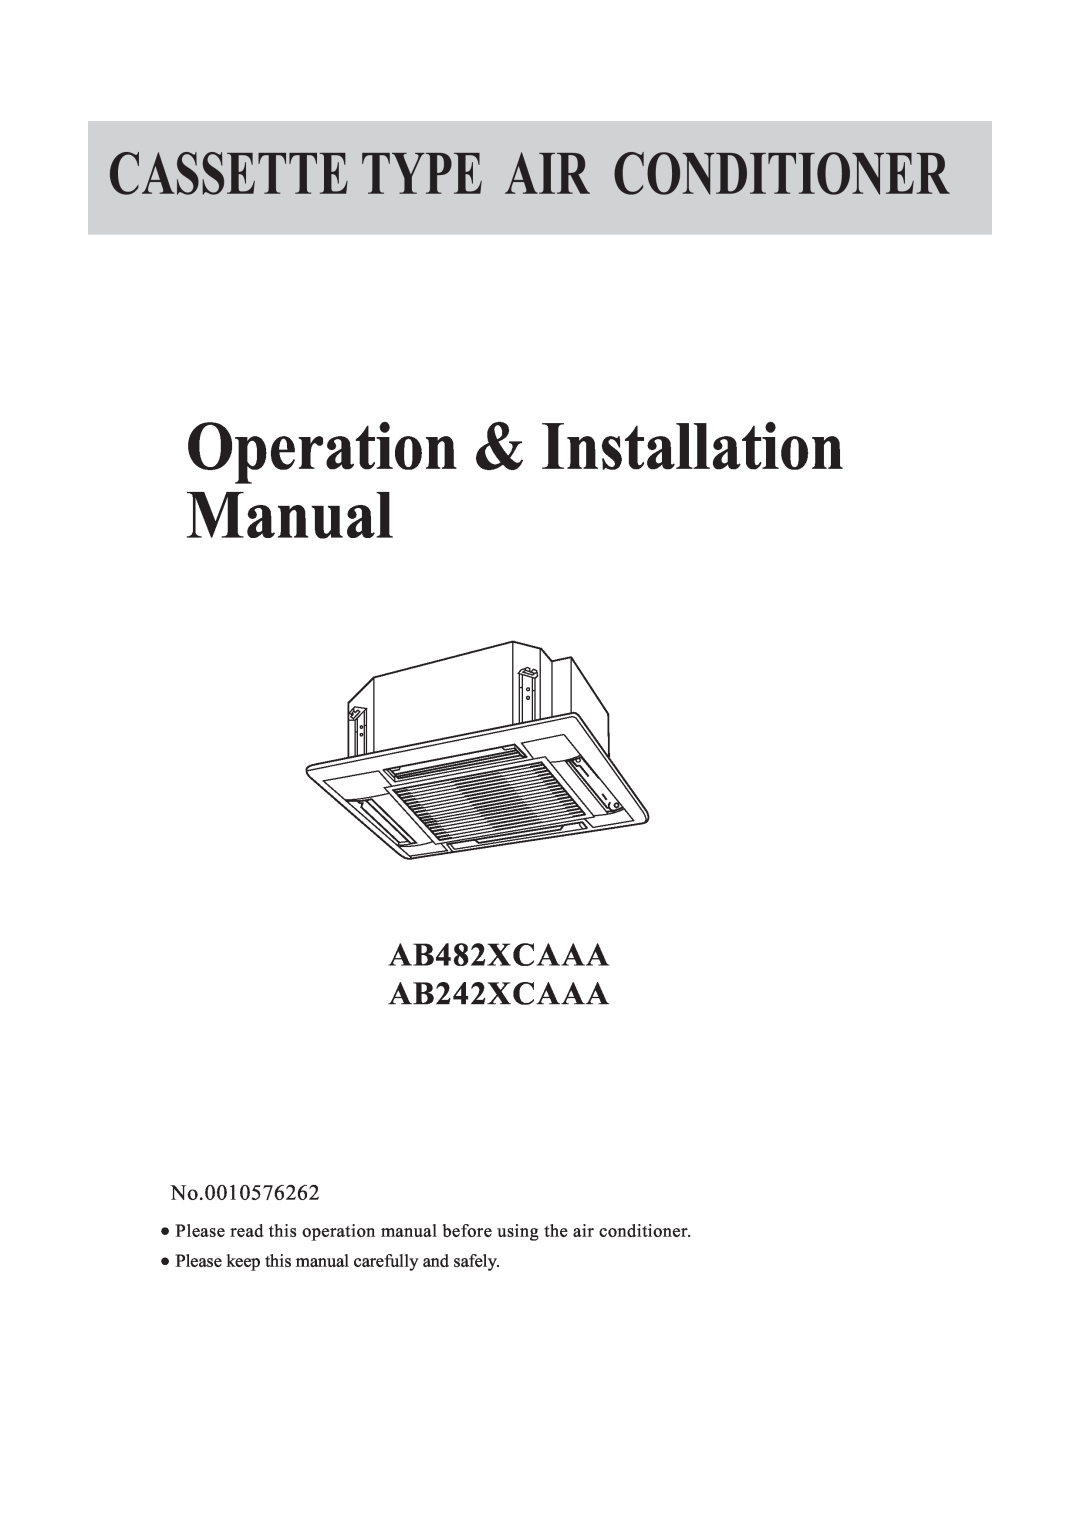 Haier operation manual Operation & Installation Manual, Cassette Type Air Conditioner, AB482XCAAA AB242XCAAA 